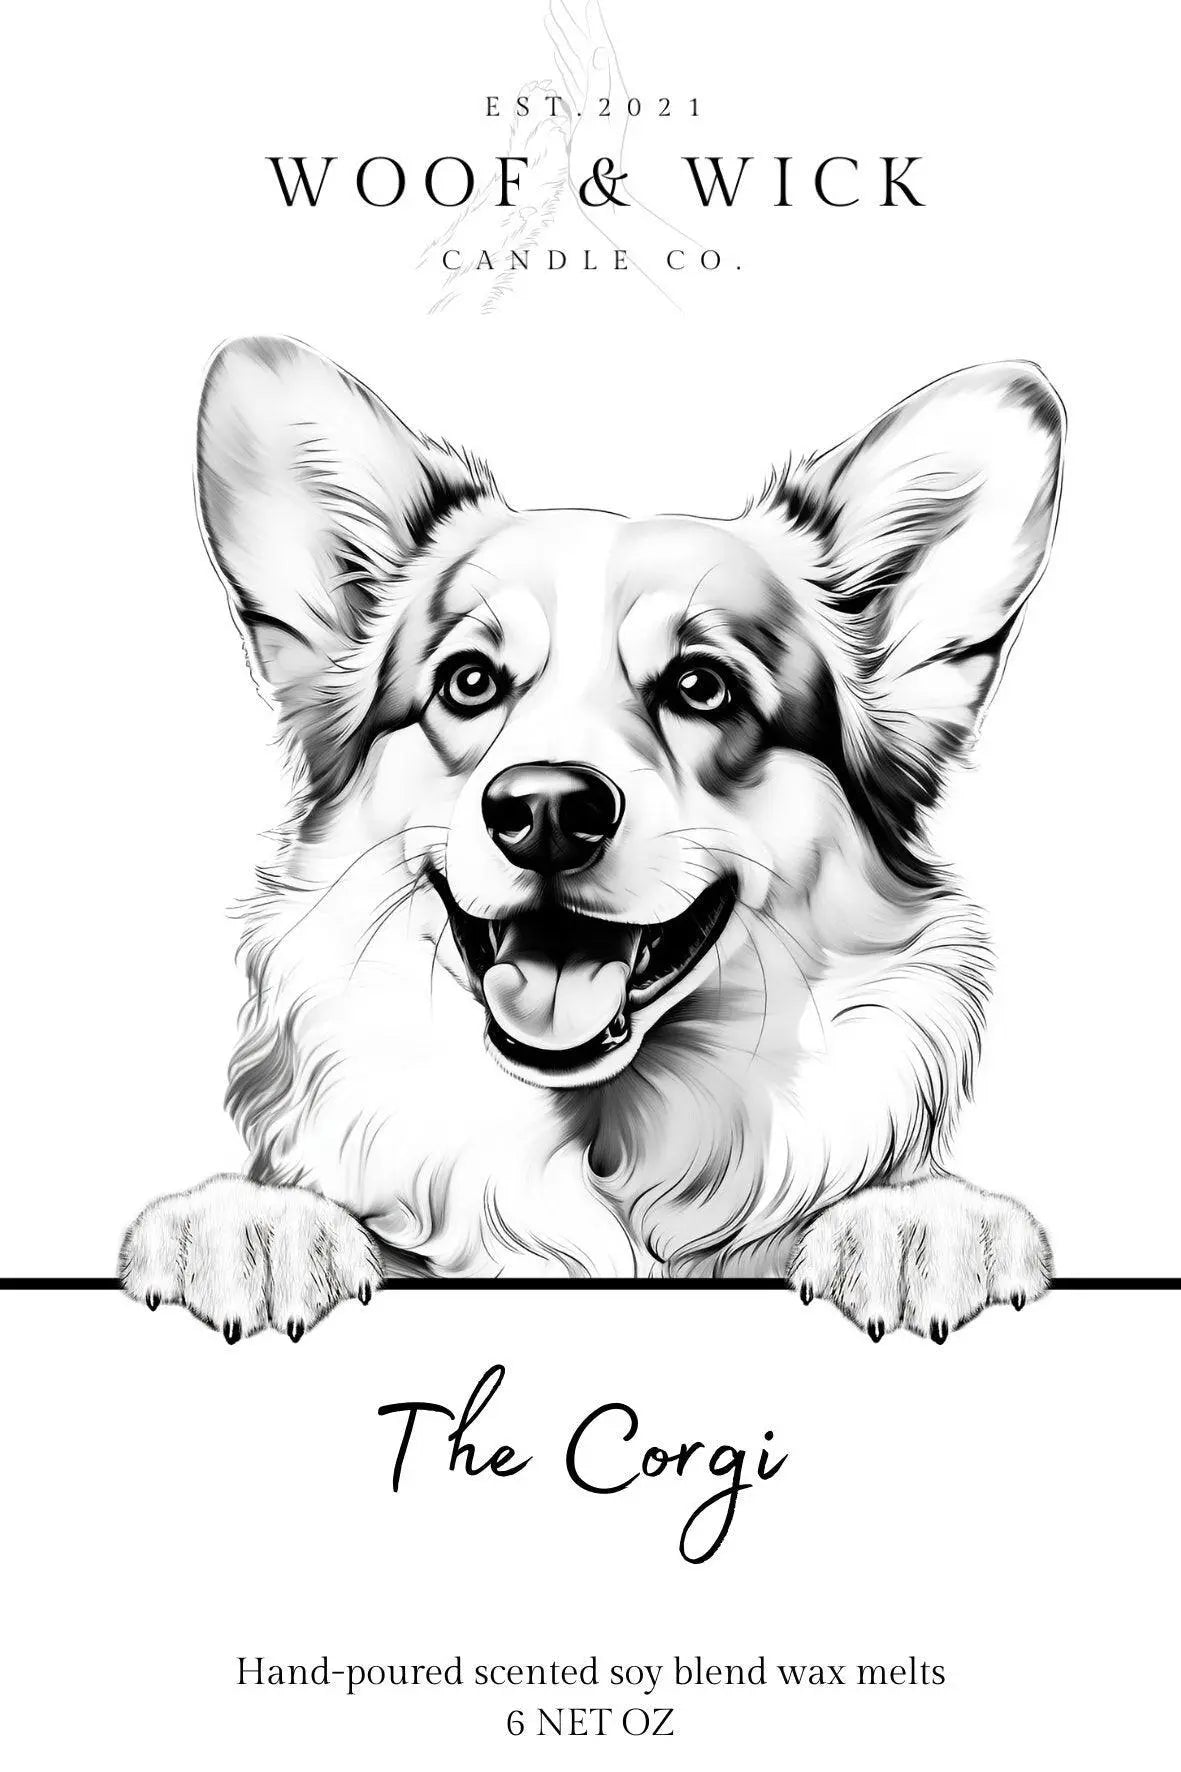 The Corgi - Personalized Dog Breed Soy Wax Melts for Wax Warmers - Woof & Wick Candle Co.